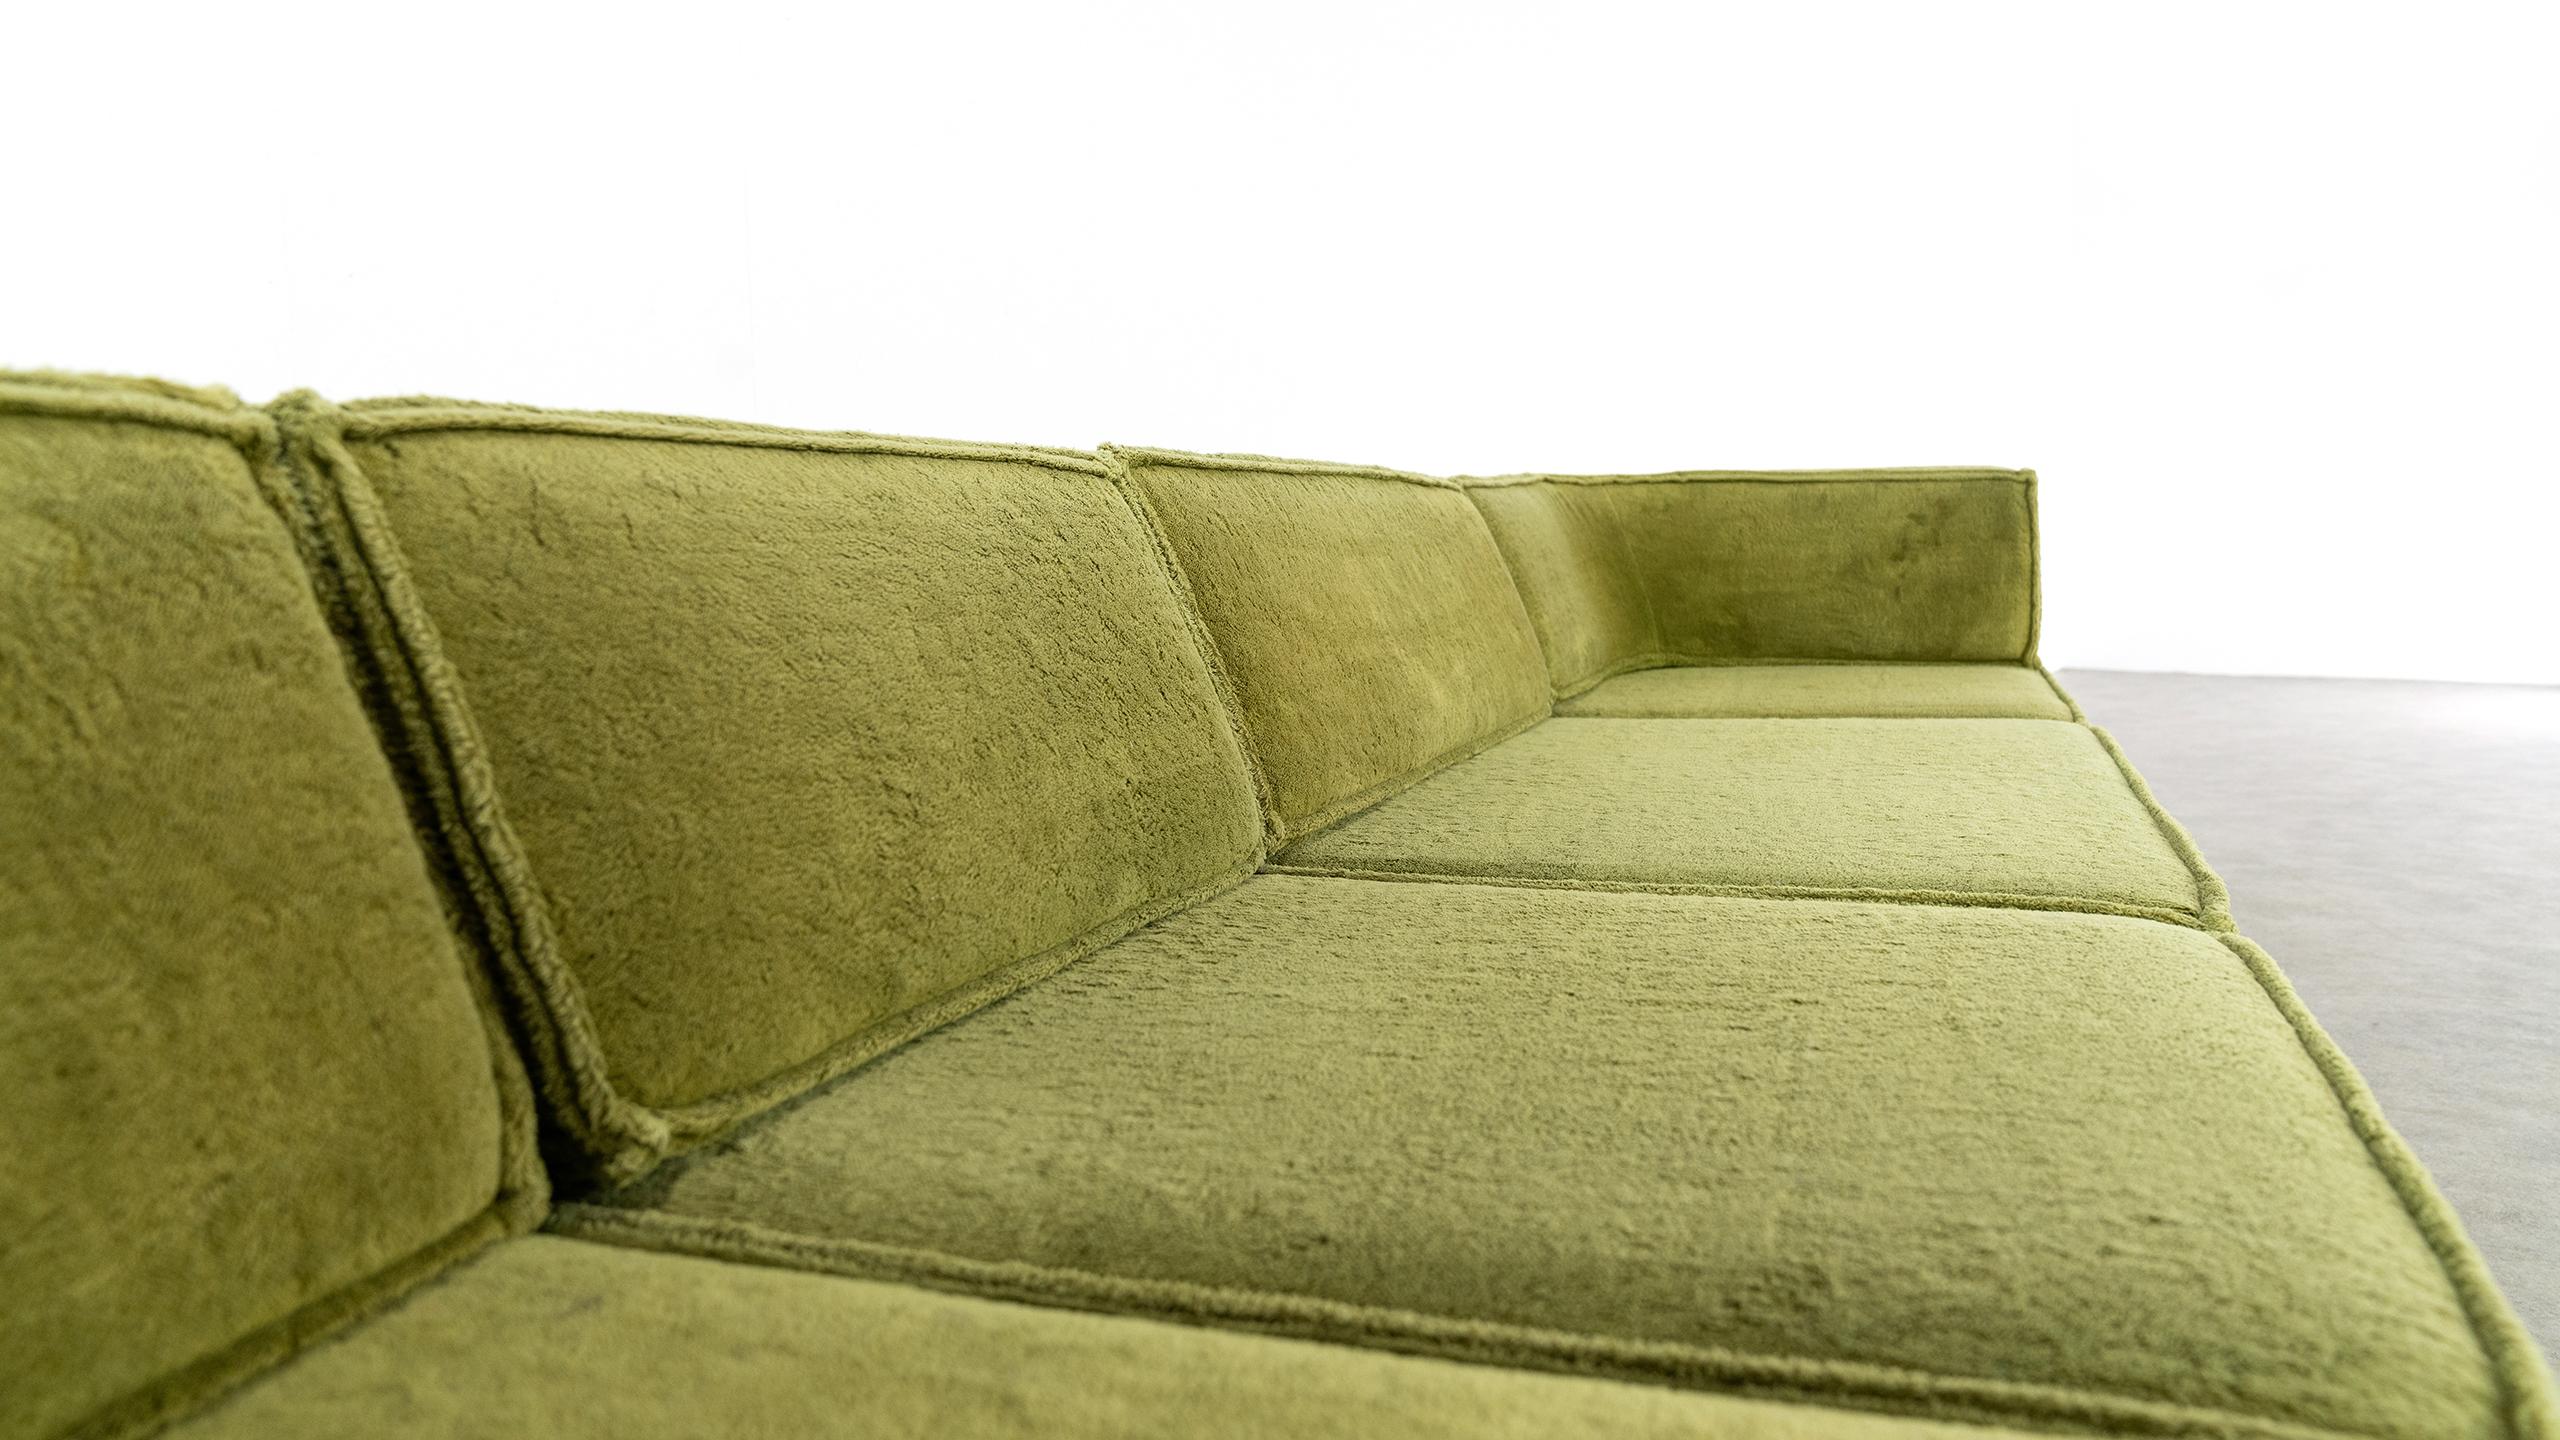 COR Trio Modular Sofa, Giant Landscape in Green, 1972 by Team Form Ag, Swiss 10